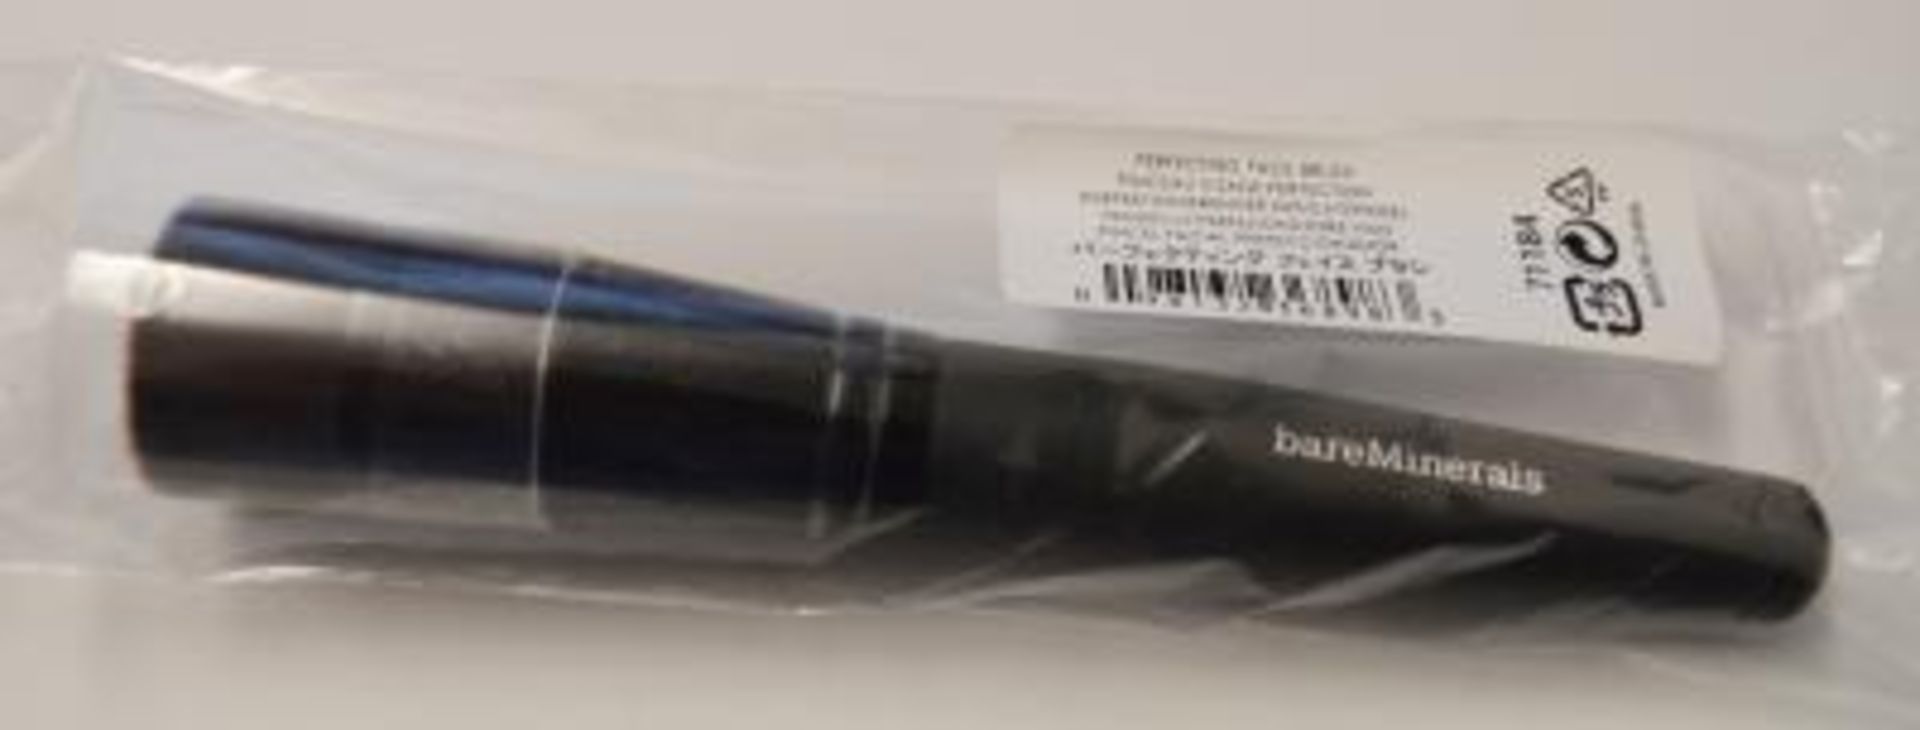 1 x Bare Escentuals bareMinerals “BARESKIN” Perfecting Face Brush - Genuine Product - Brand New - Image 3 of 3